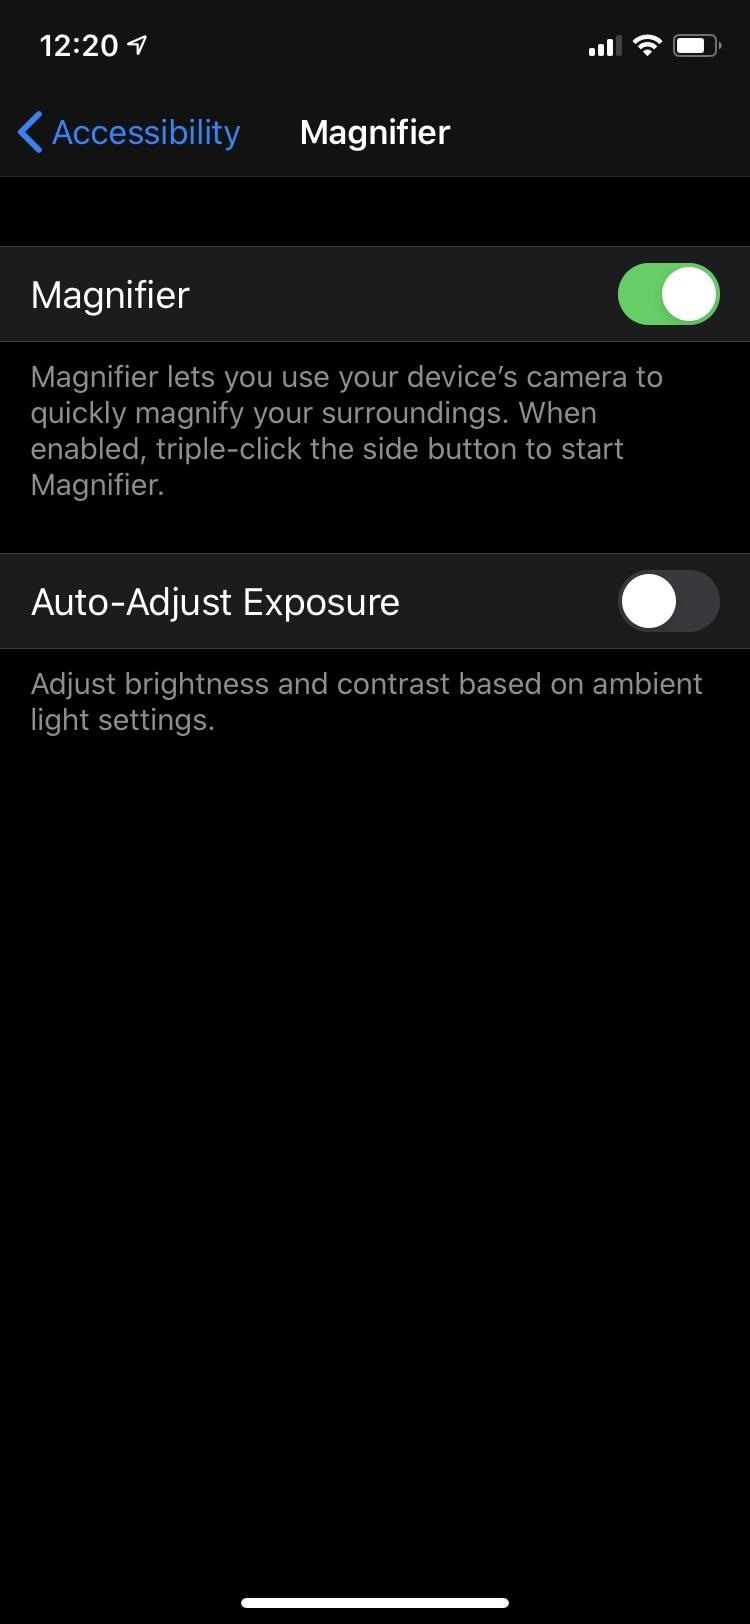 Make It Easier to Double & Triple-Click Your iPhone's Side Button with One Simple Adjustment